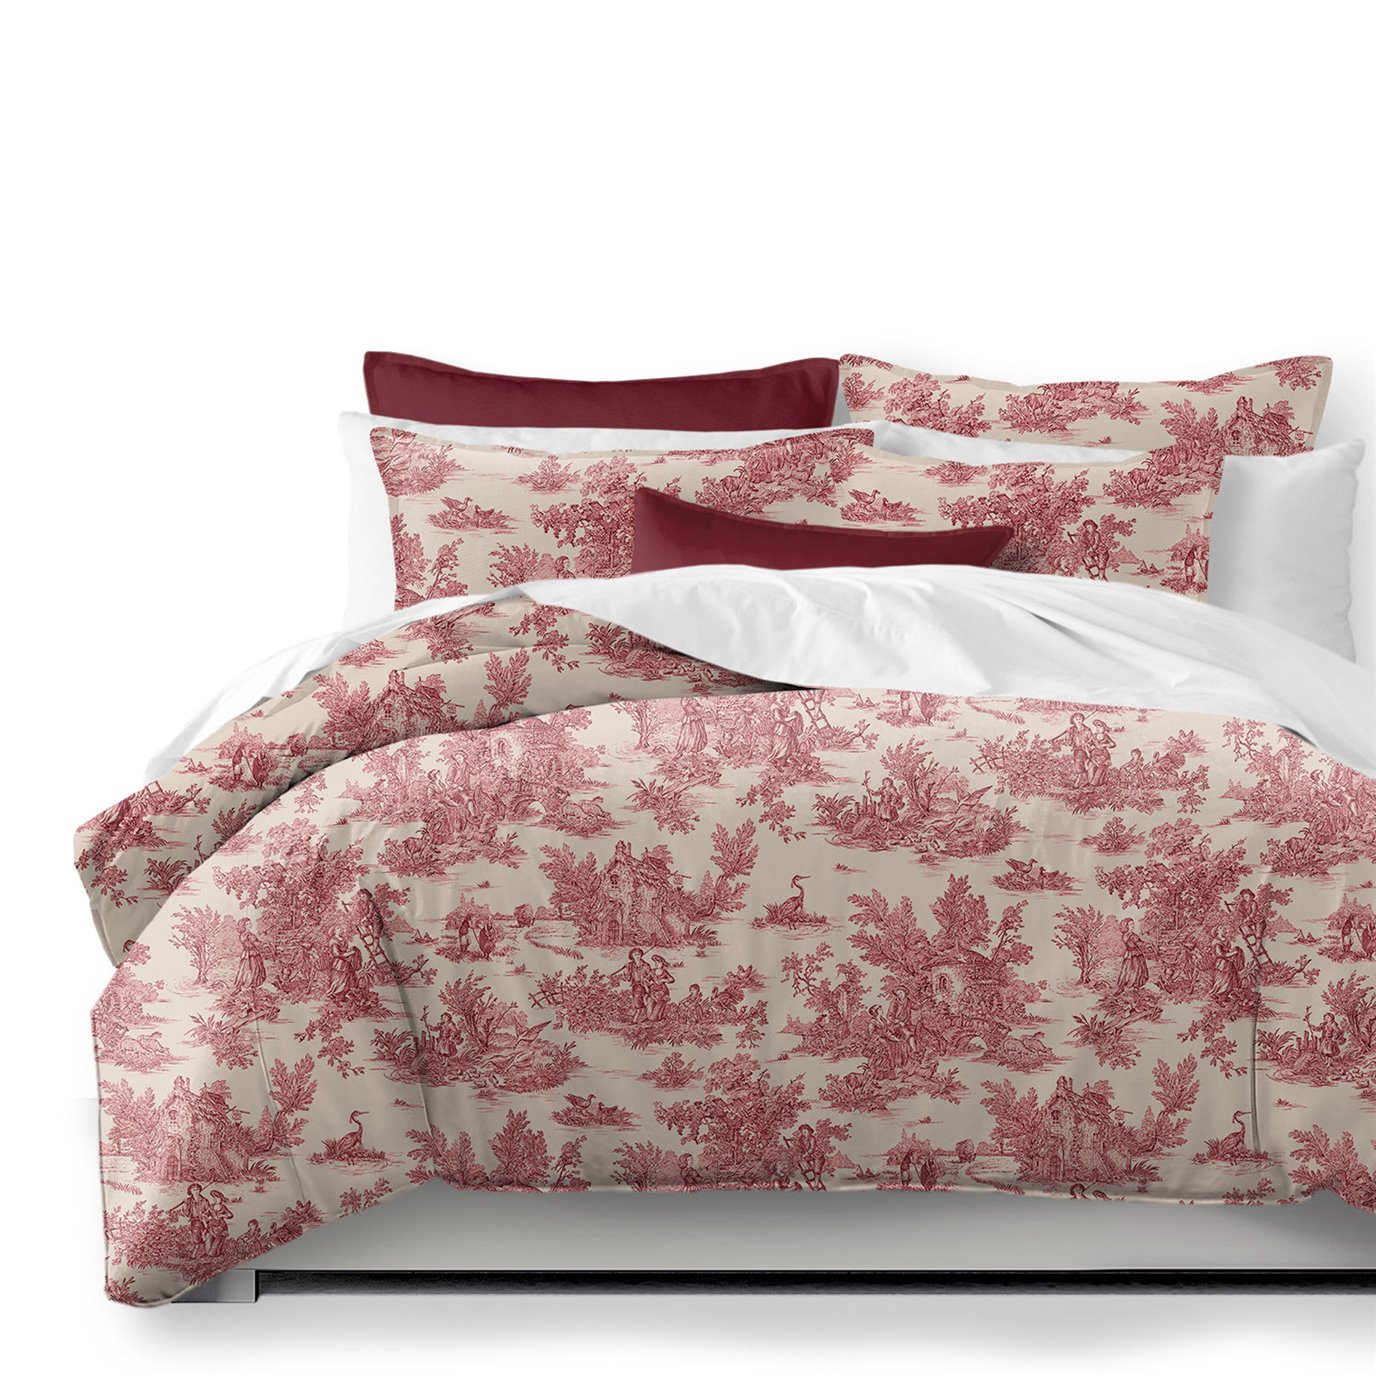 Bouclair Red Coverlet and Pillow Sham(s) Set - Size Twin